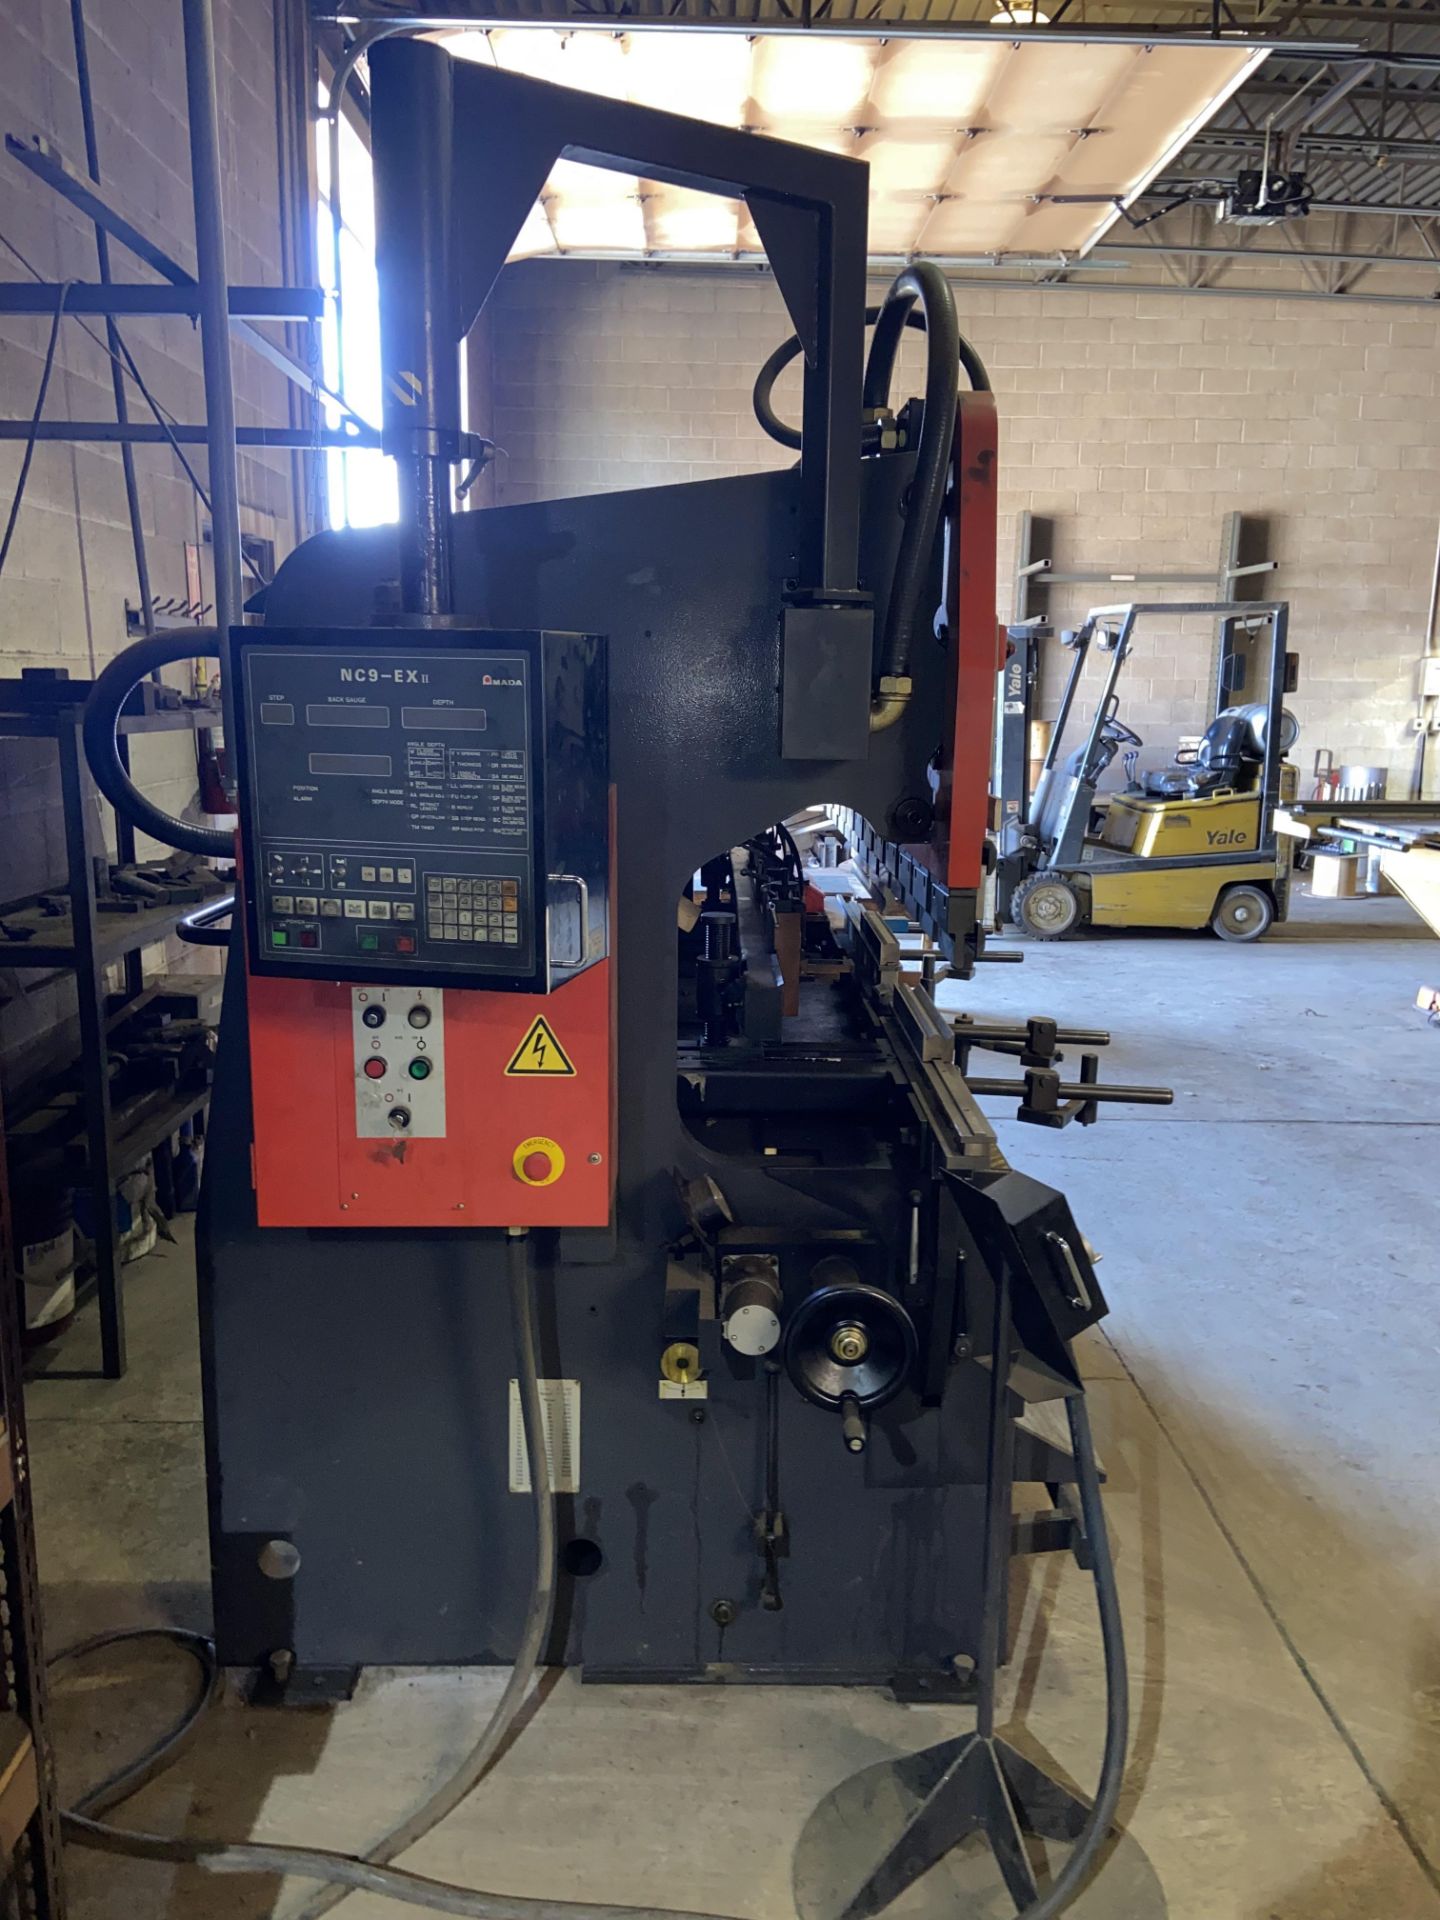 Amada RG-80 Press Brake with NC9-EX Control (LOCATED IN CORRY, PA) - Image 8 of 9